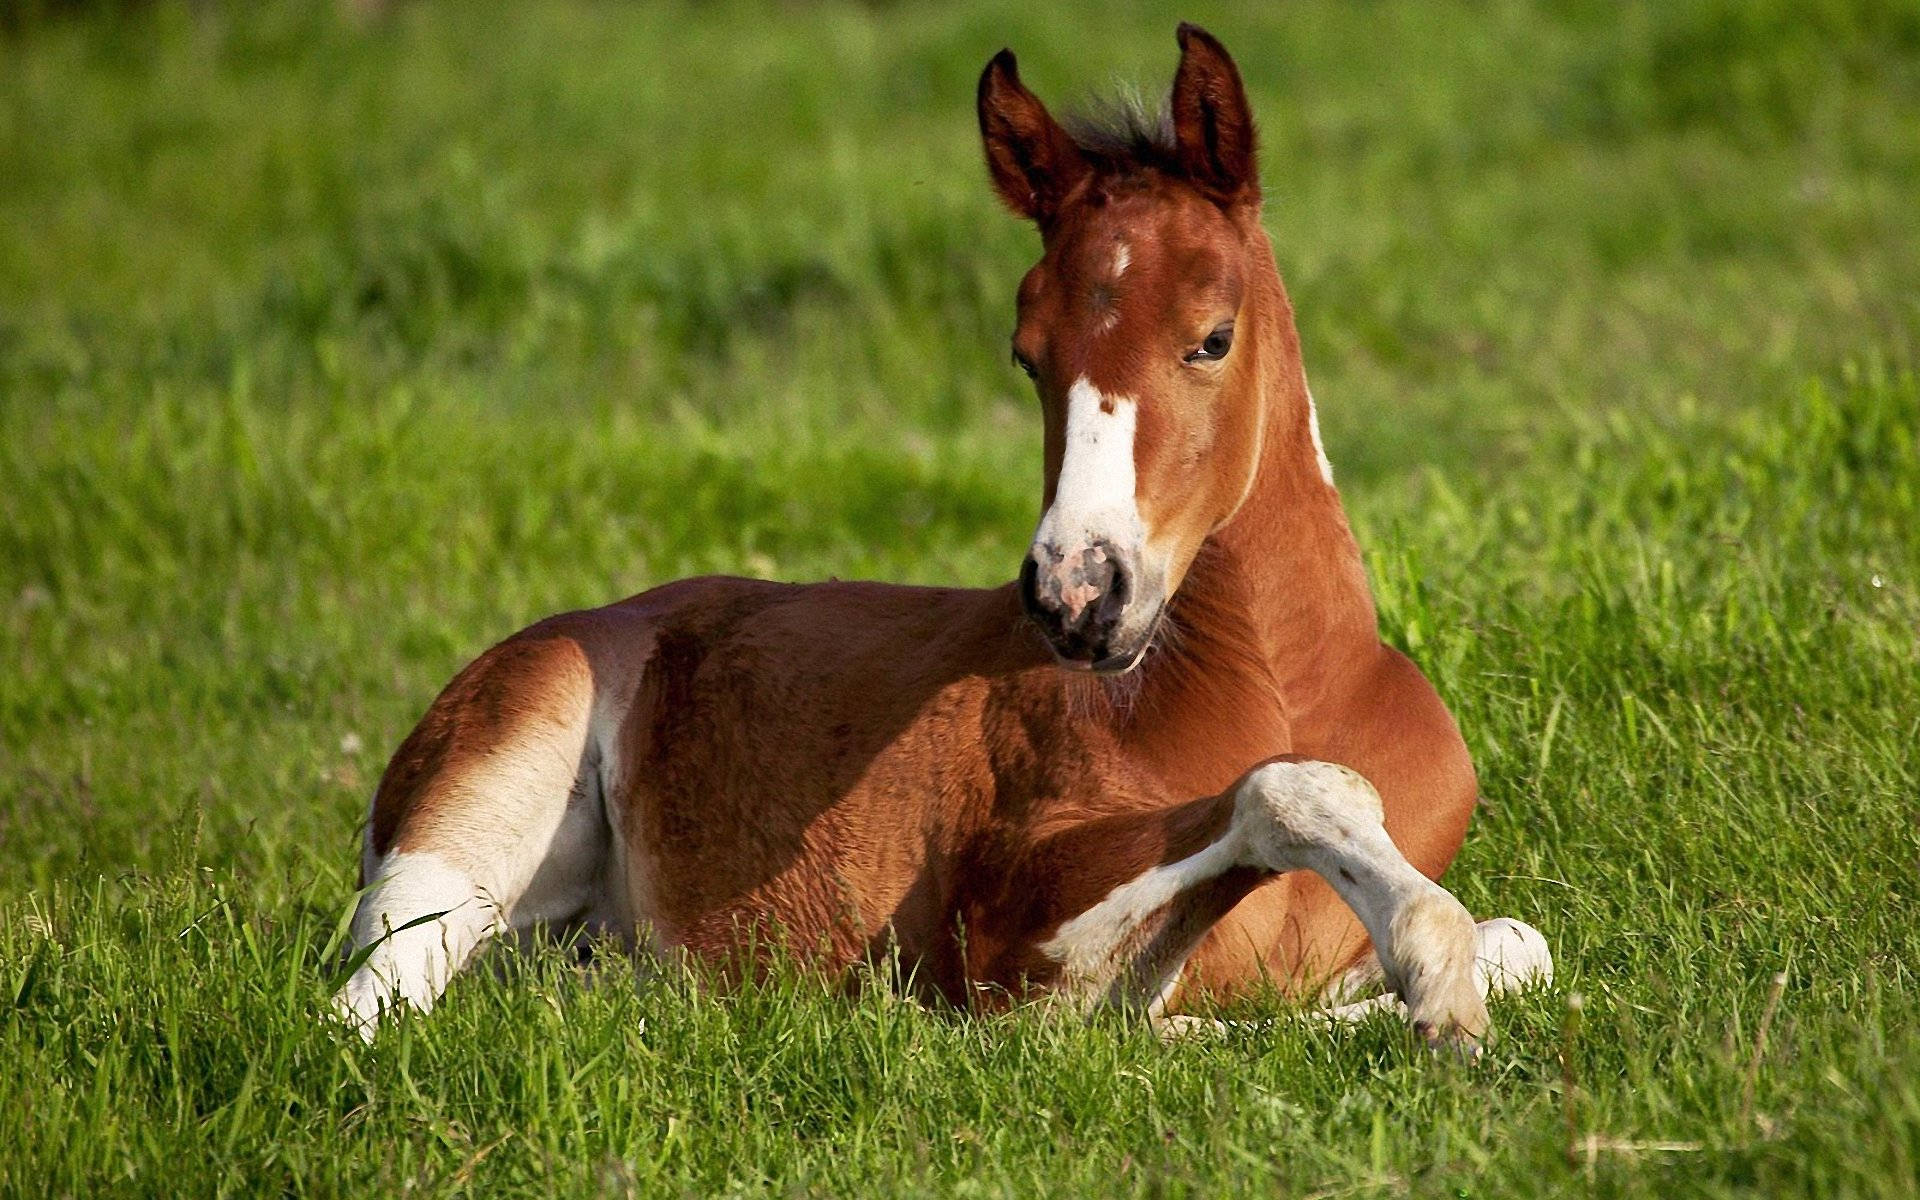 Cute Horse Relaxing On The Grass Background